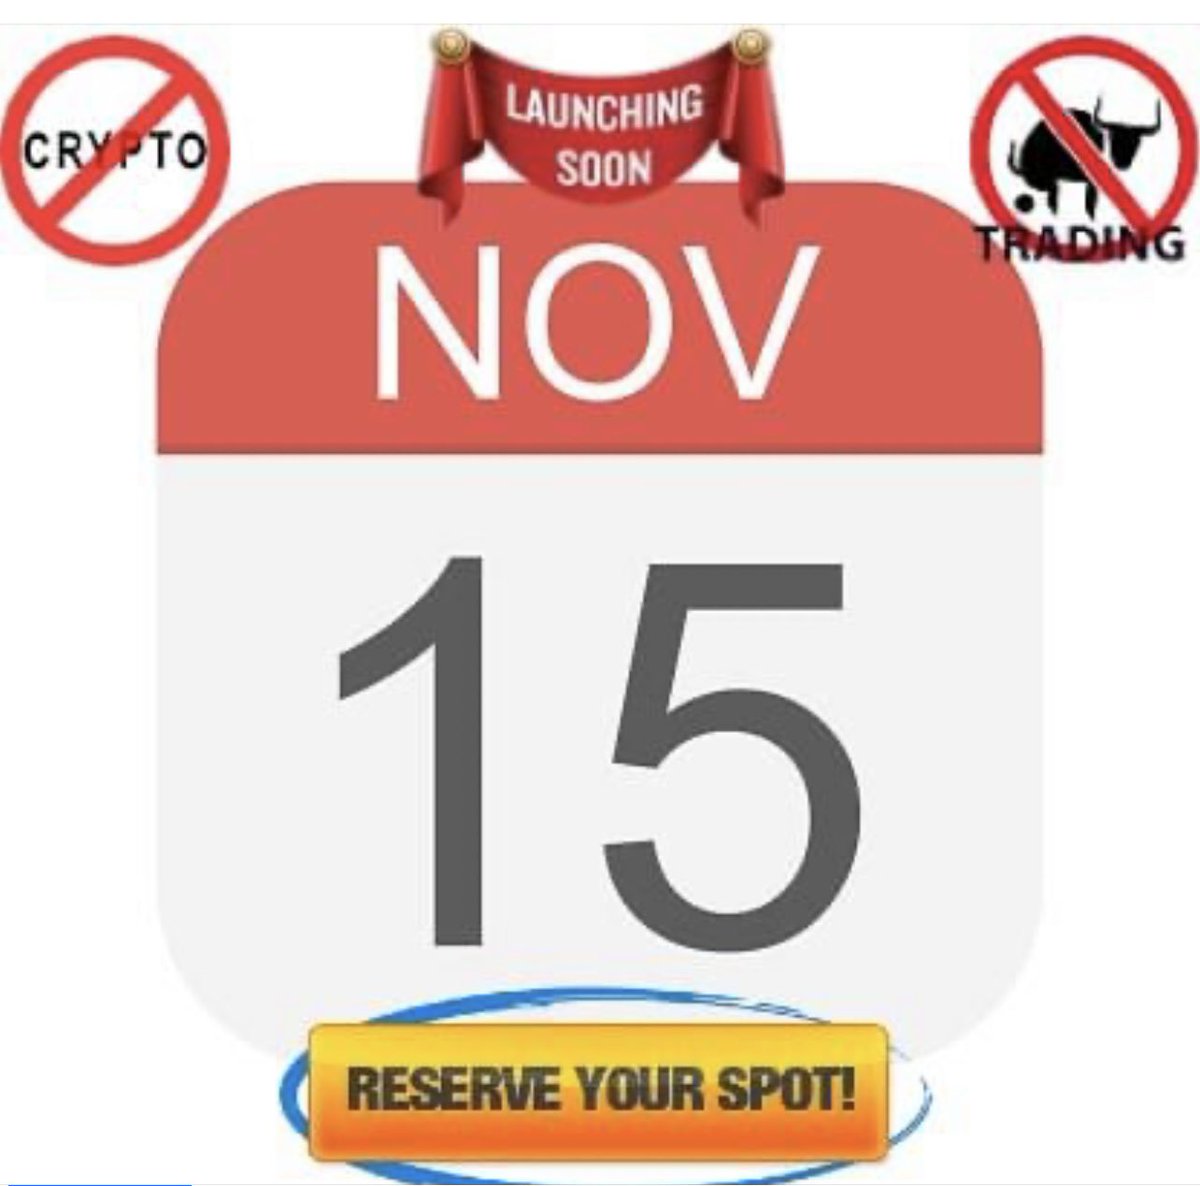 Get Paid To Play The Lottery!! Even if you never win!!!
Top Positions Available Now. Launching Worldwide On November 15th! Lots of spillover with this 3x10 matrix.
Join For FREE Here:
sharethewinnings.com/playlotto